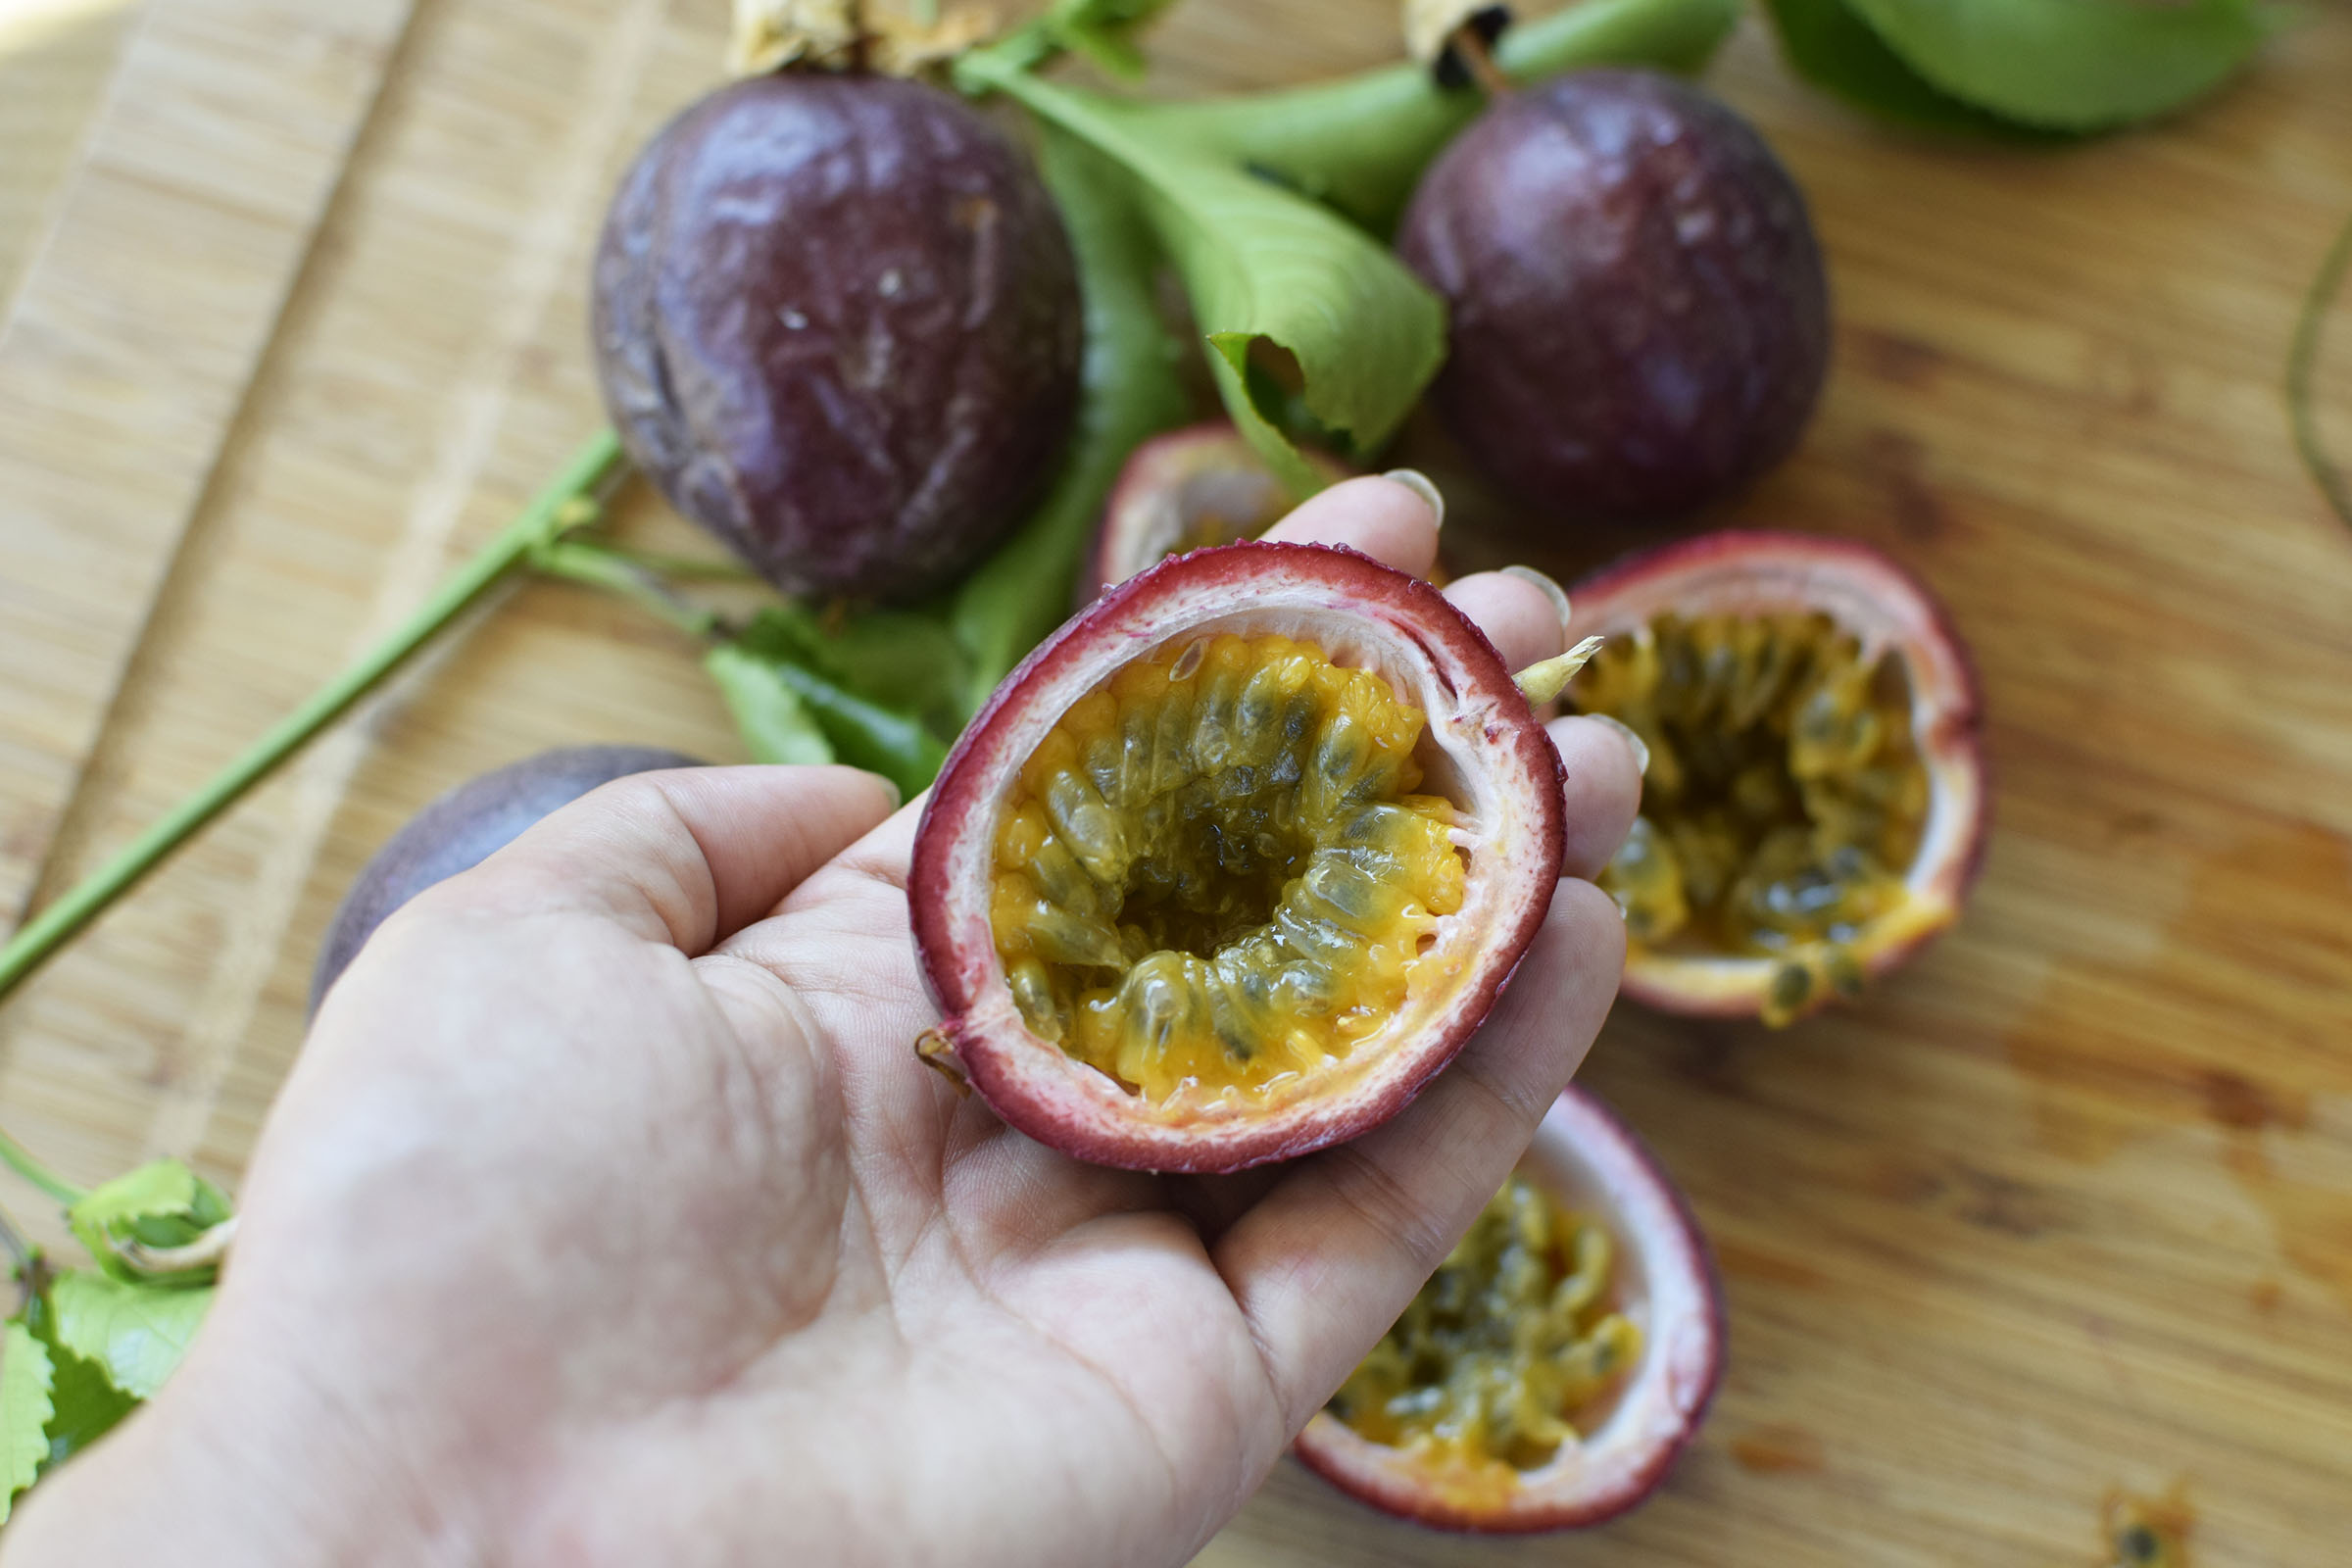 How to Eat Passion Fruit: Processing, Juicing, Storing & Using